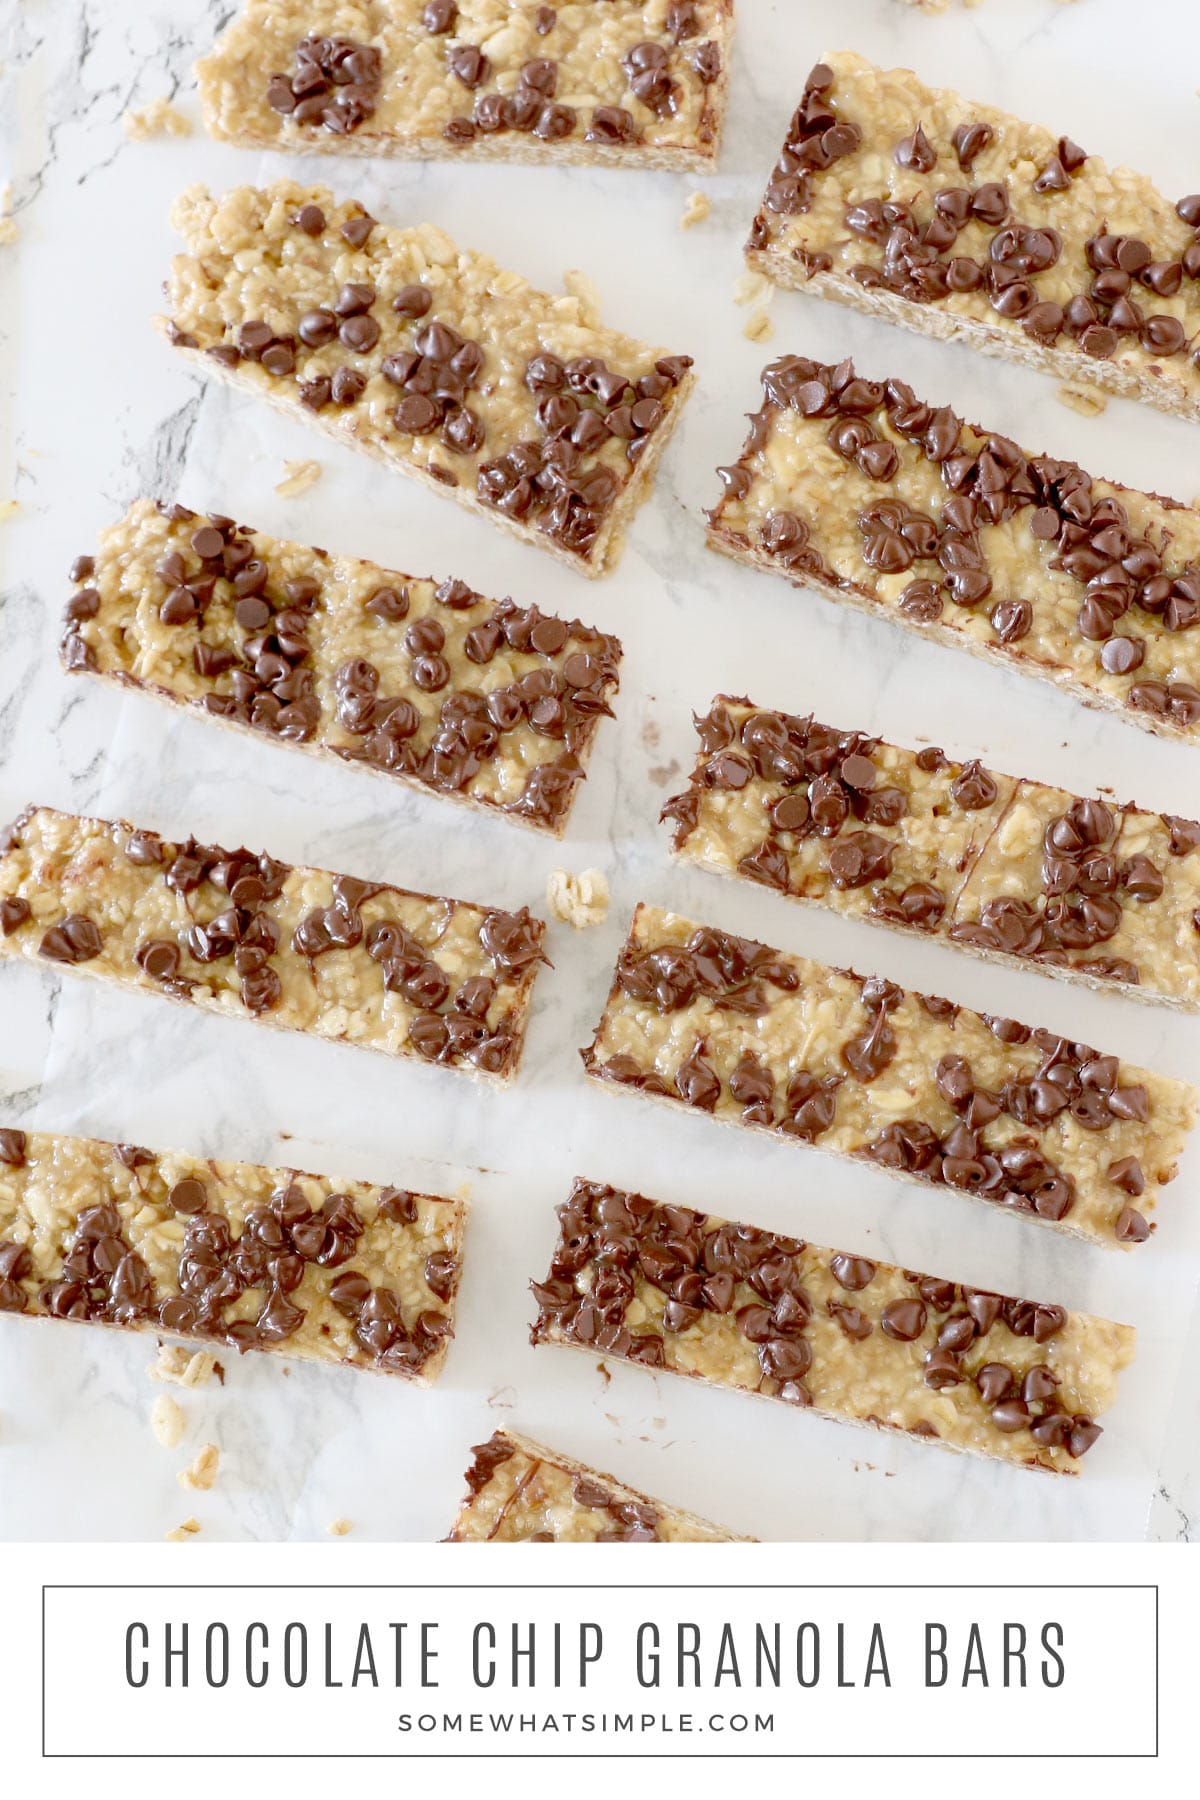 Homemade granola bars are easy to make and taste delicious! This simple chocolate chip granola bar recipe uses only 5 ingredients and requires no time in the oven! via @somewhatsimple